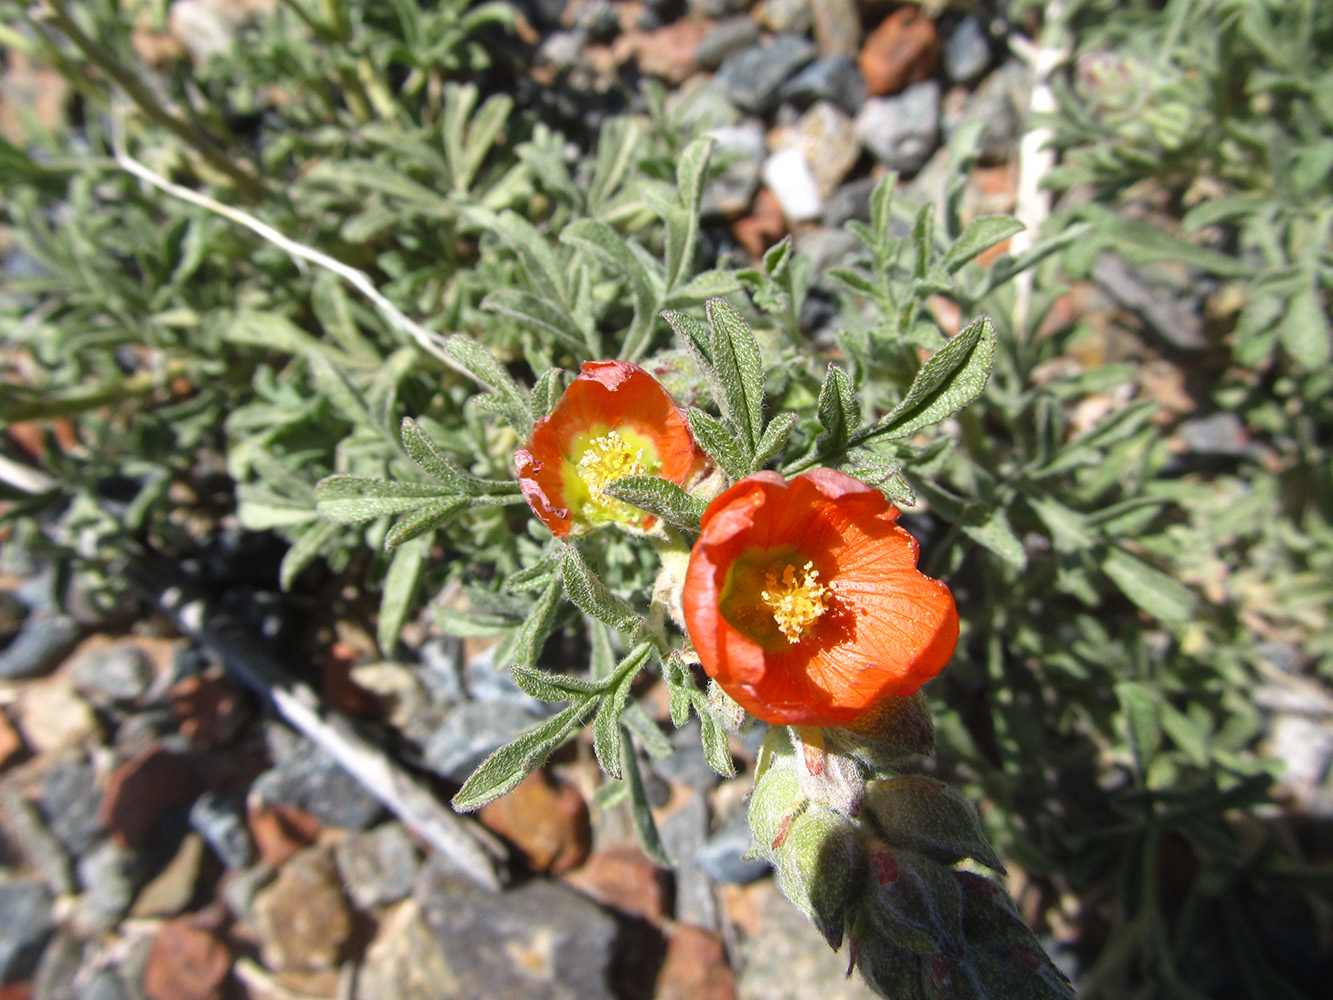 Close-up of green foliage with orange flower growing on a substrate of small rocks